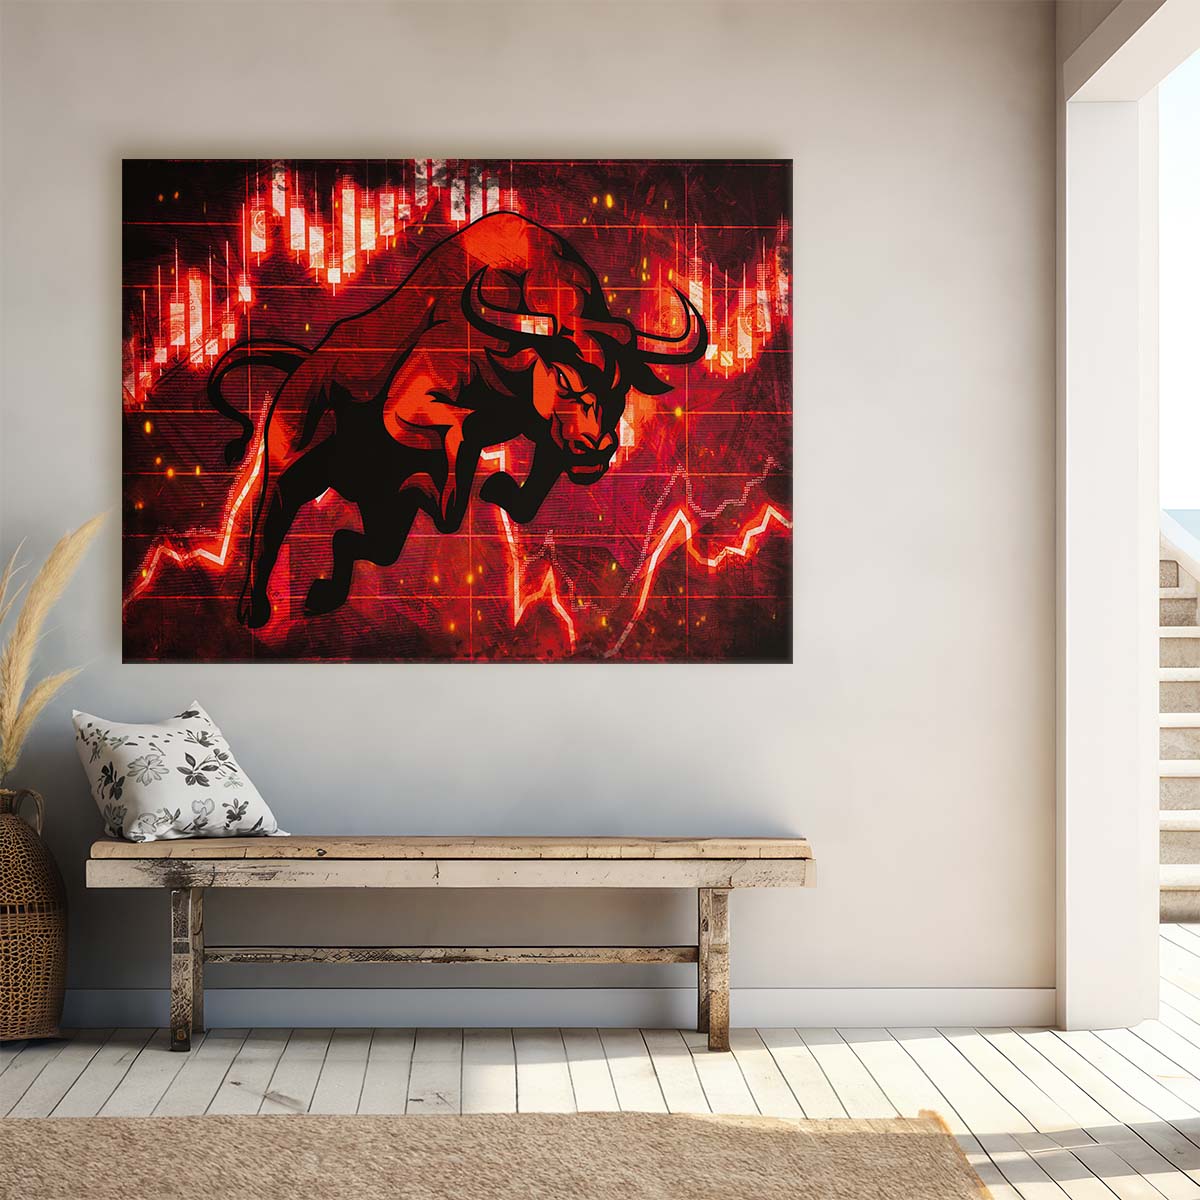 WallStreet Bull Wall Art by Luxuriance Designs. Made in USA.